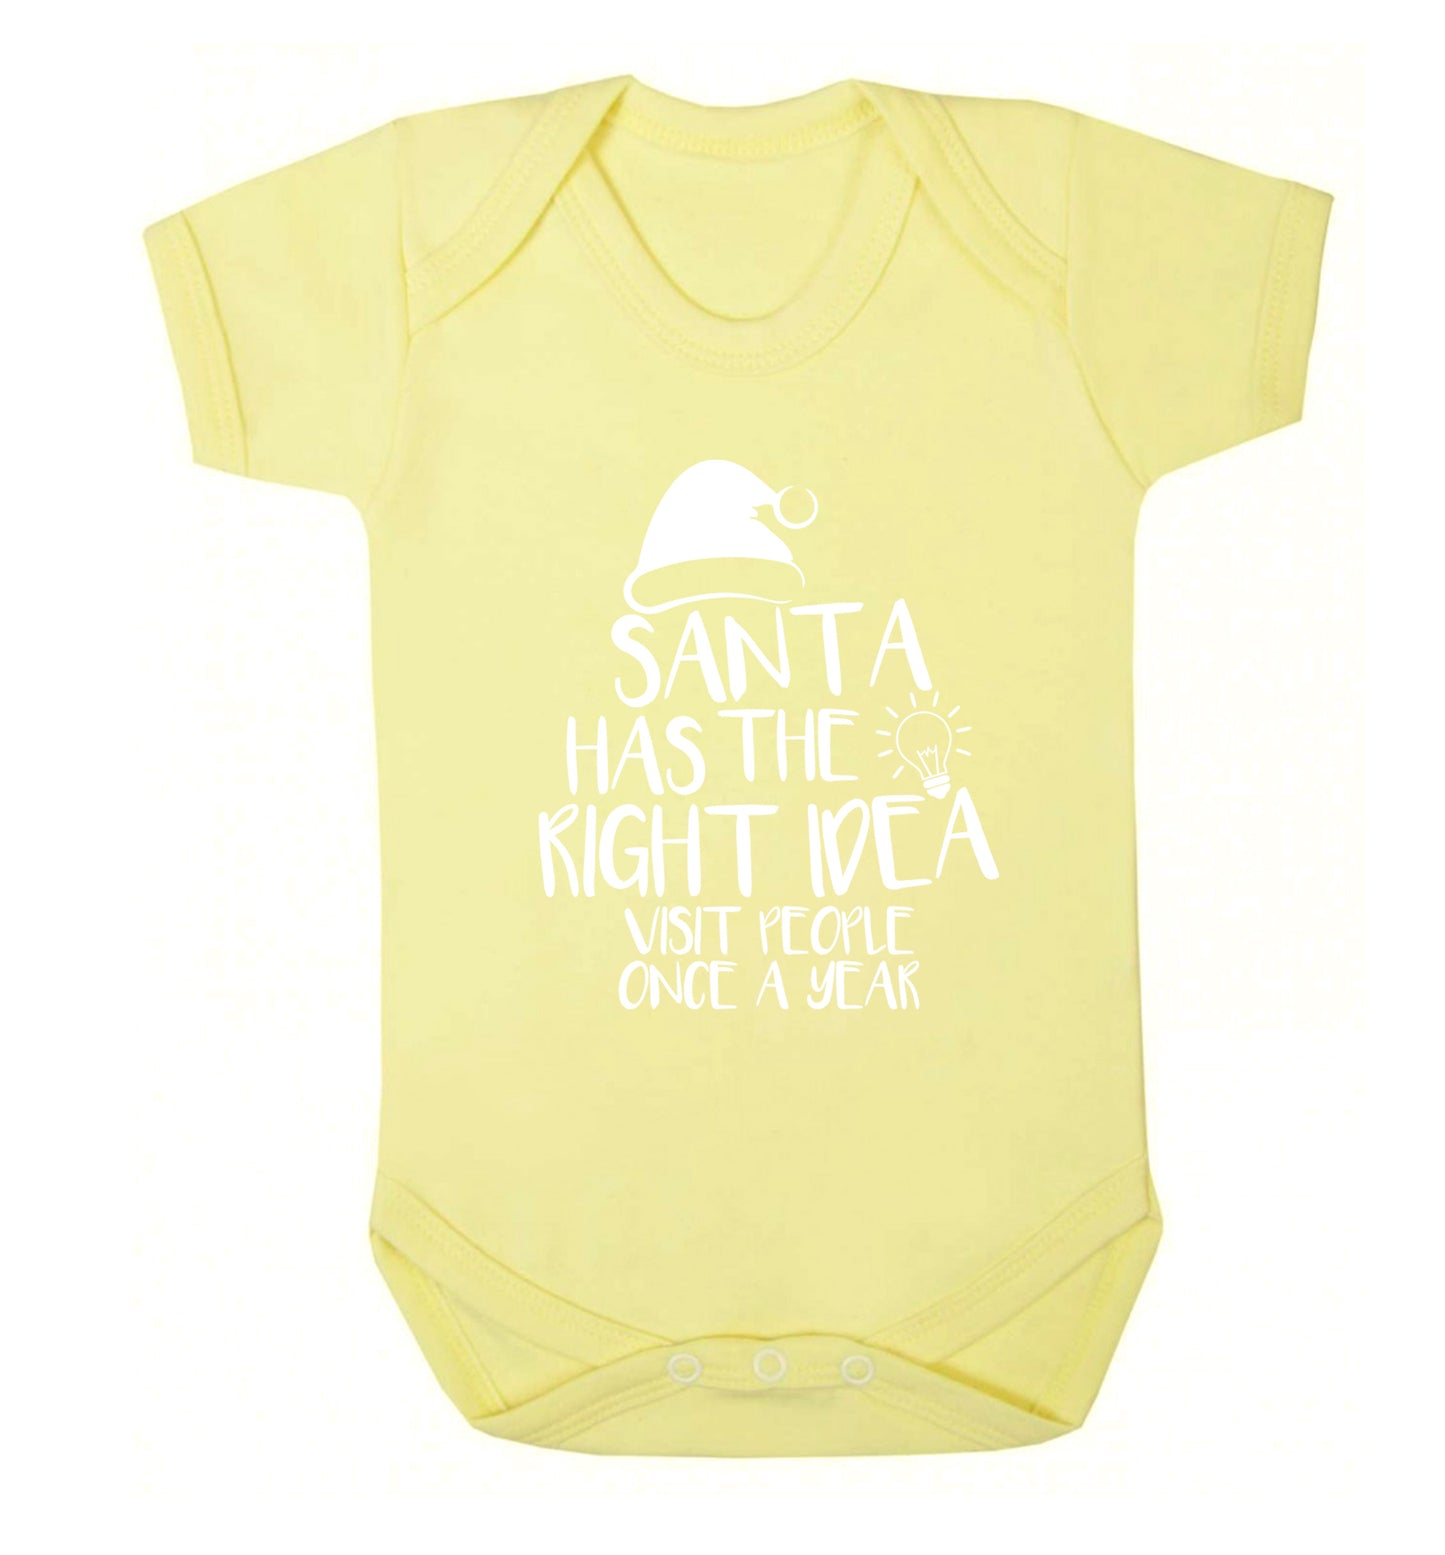 Santa has the right idea visit people once a year Baby Vest pale yellow 18-24 months